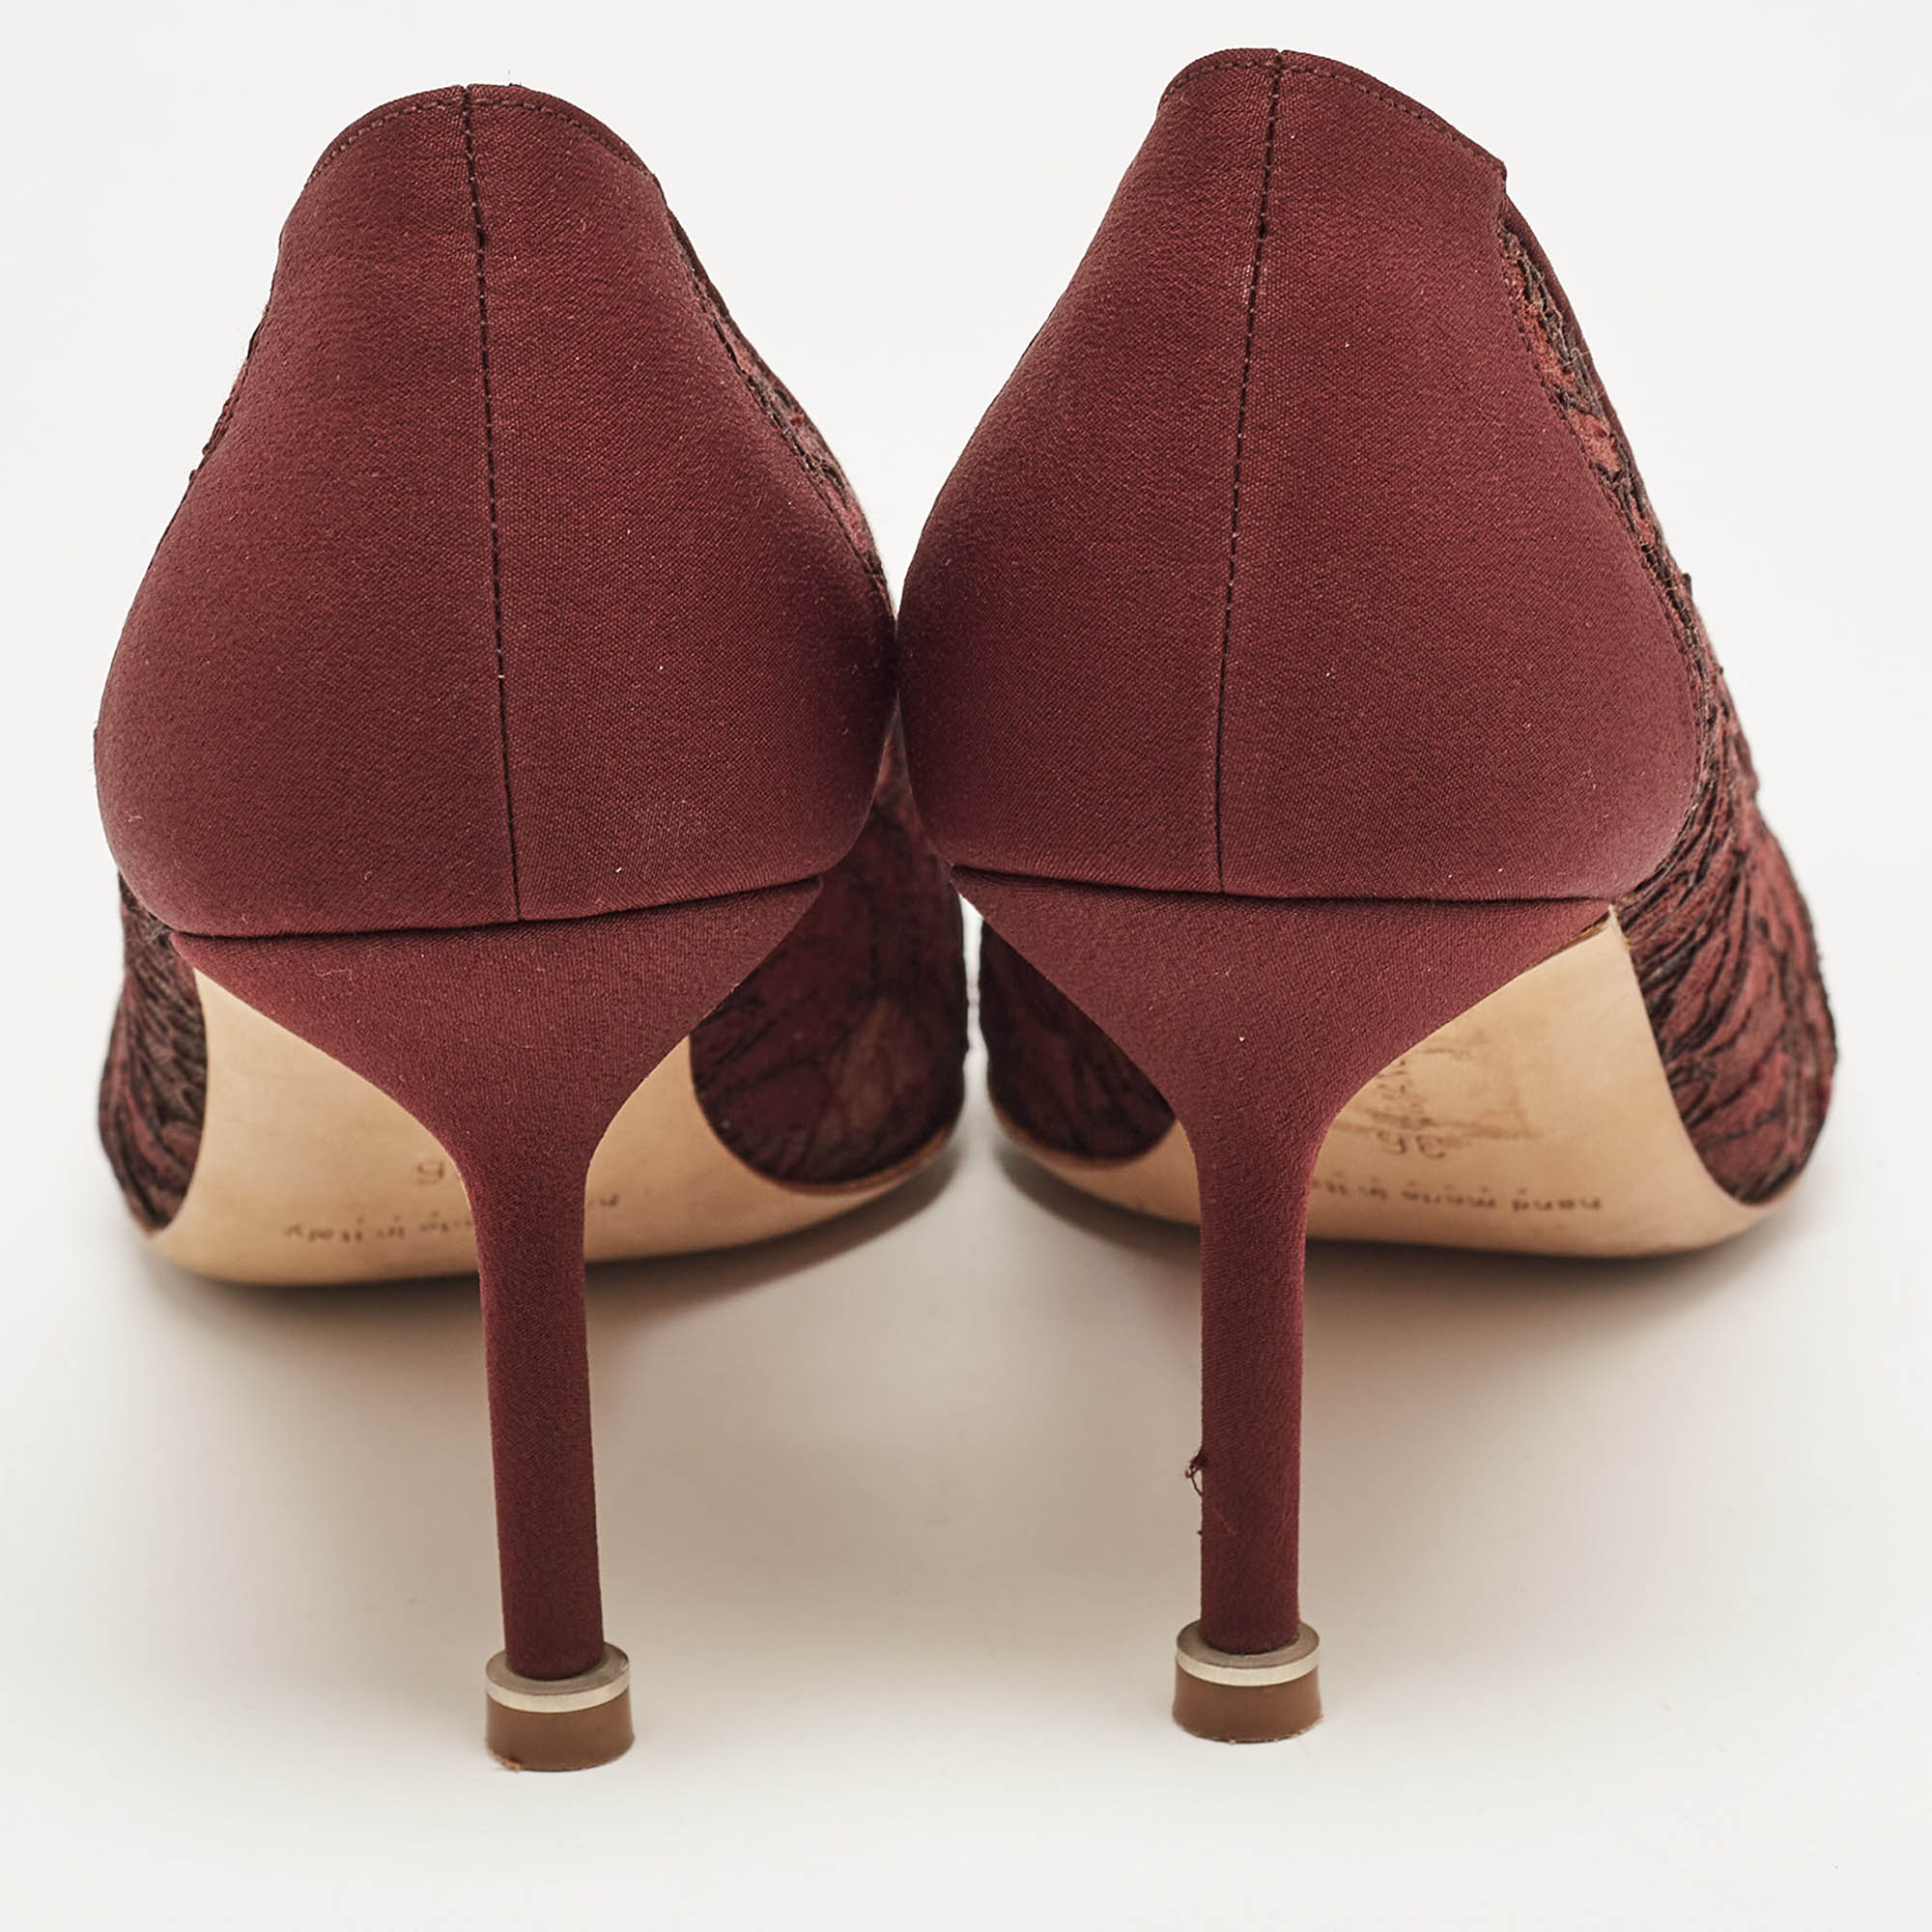 Manolo Blahnik Burgundy Lace And Mesh Hangisi Pointed Toe Pumps Size 36